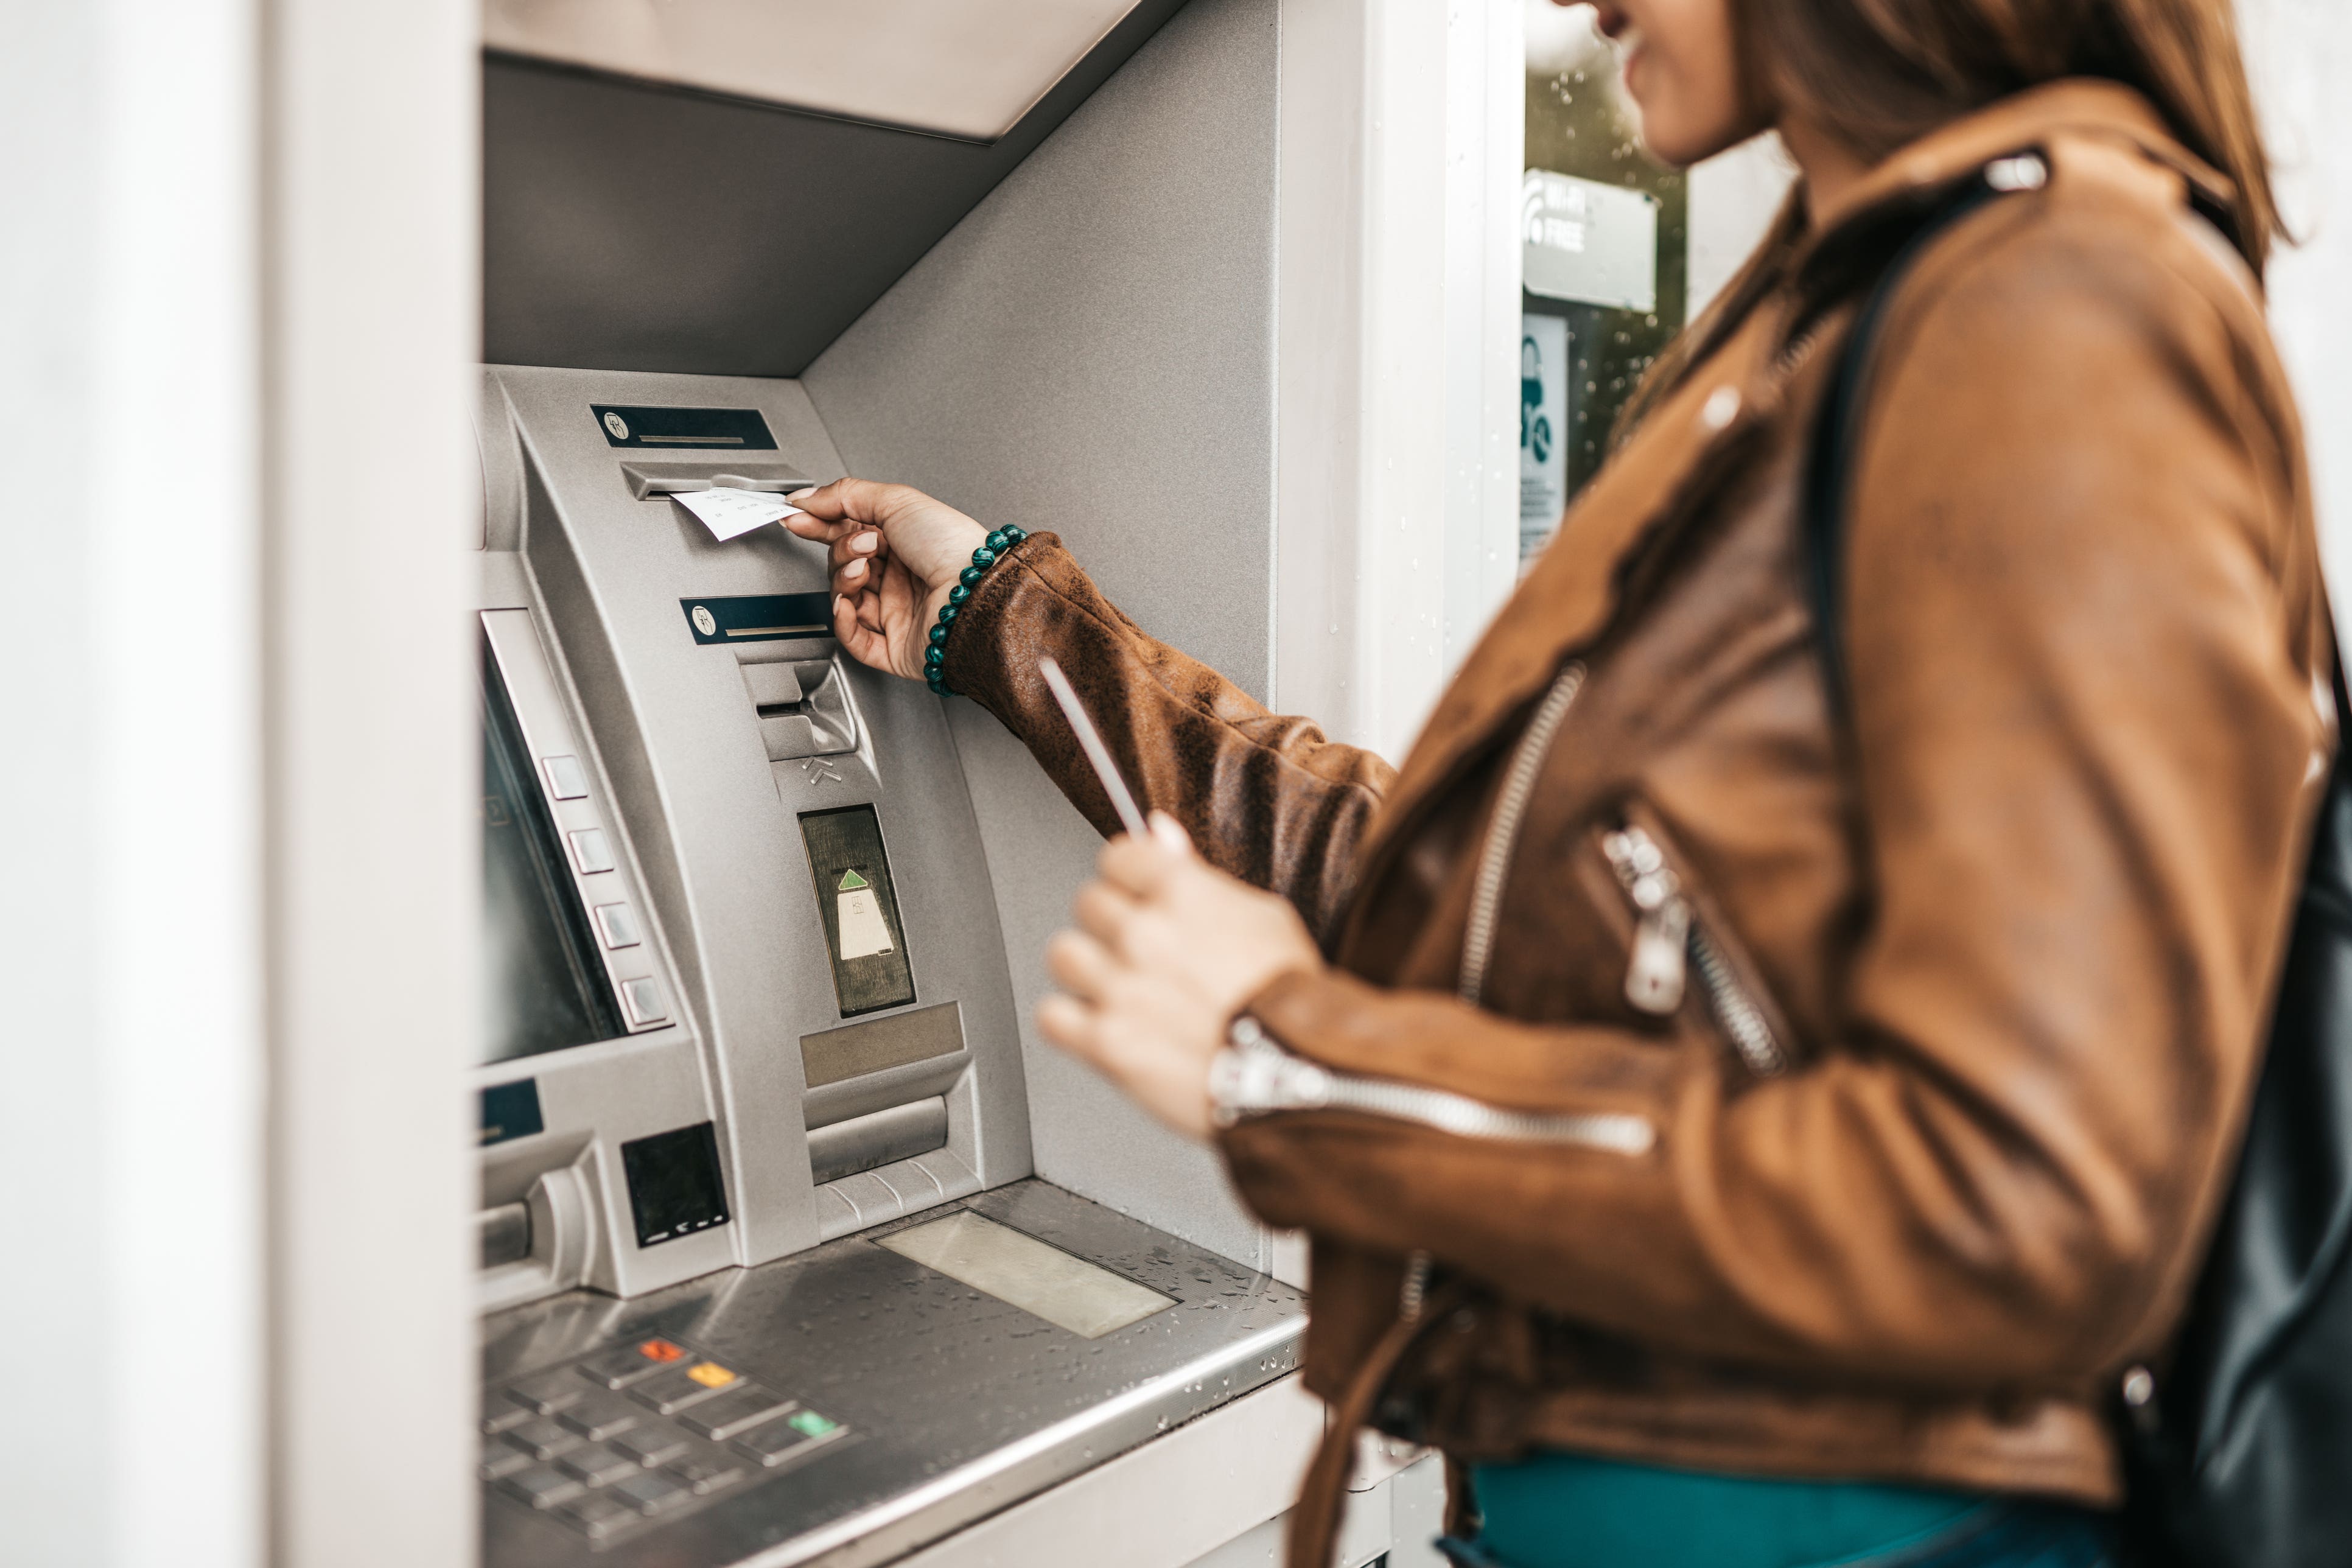 An Garda Siochana said it was aware of an “unusual volume of activity” at some ATMs across the country